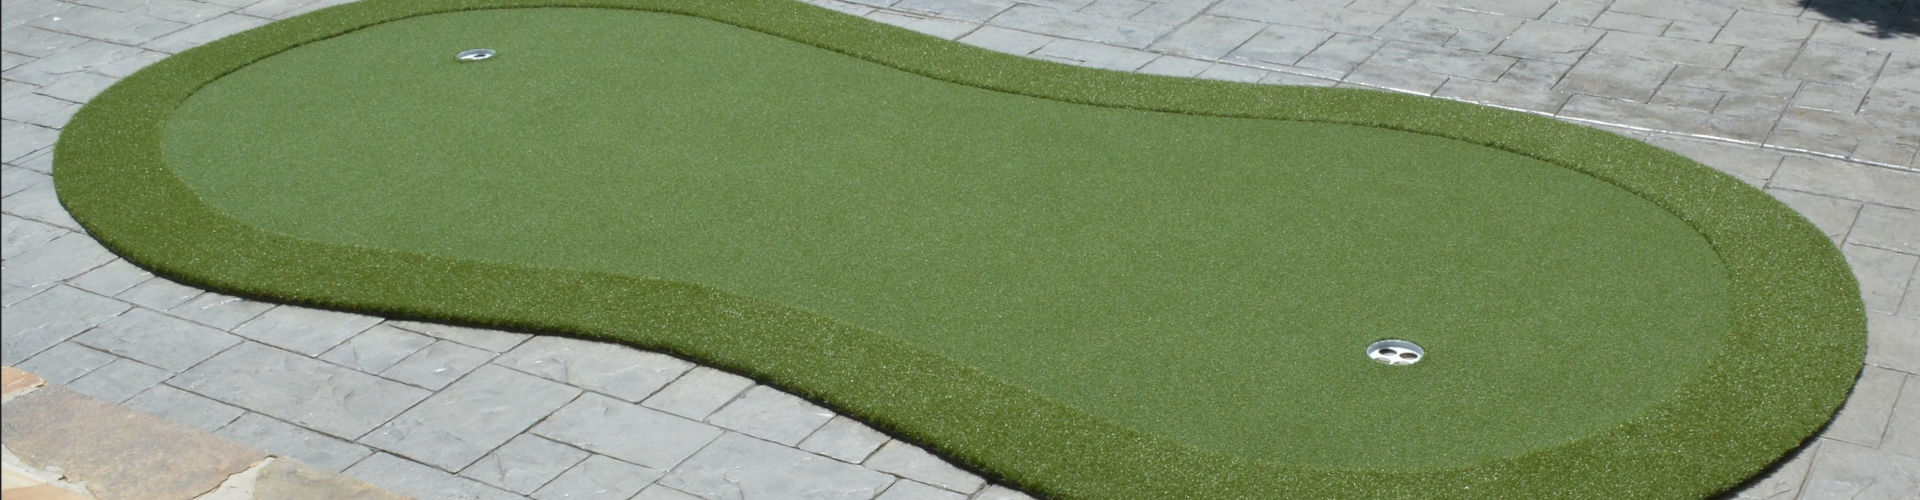 Southwest Greens of Southern California Portable Putting Green